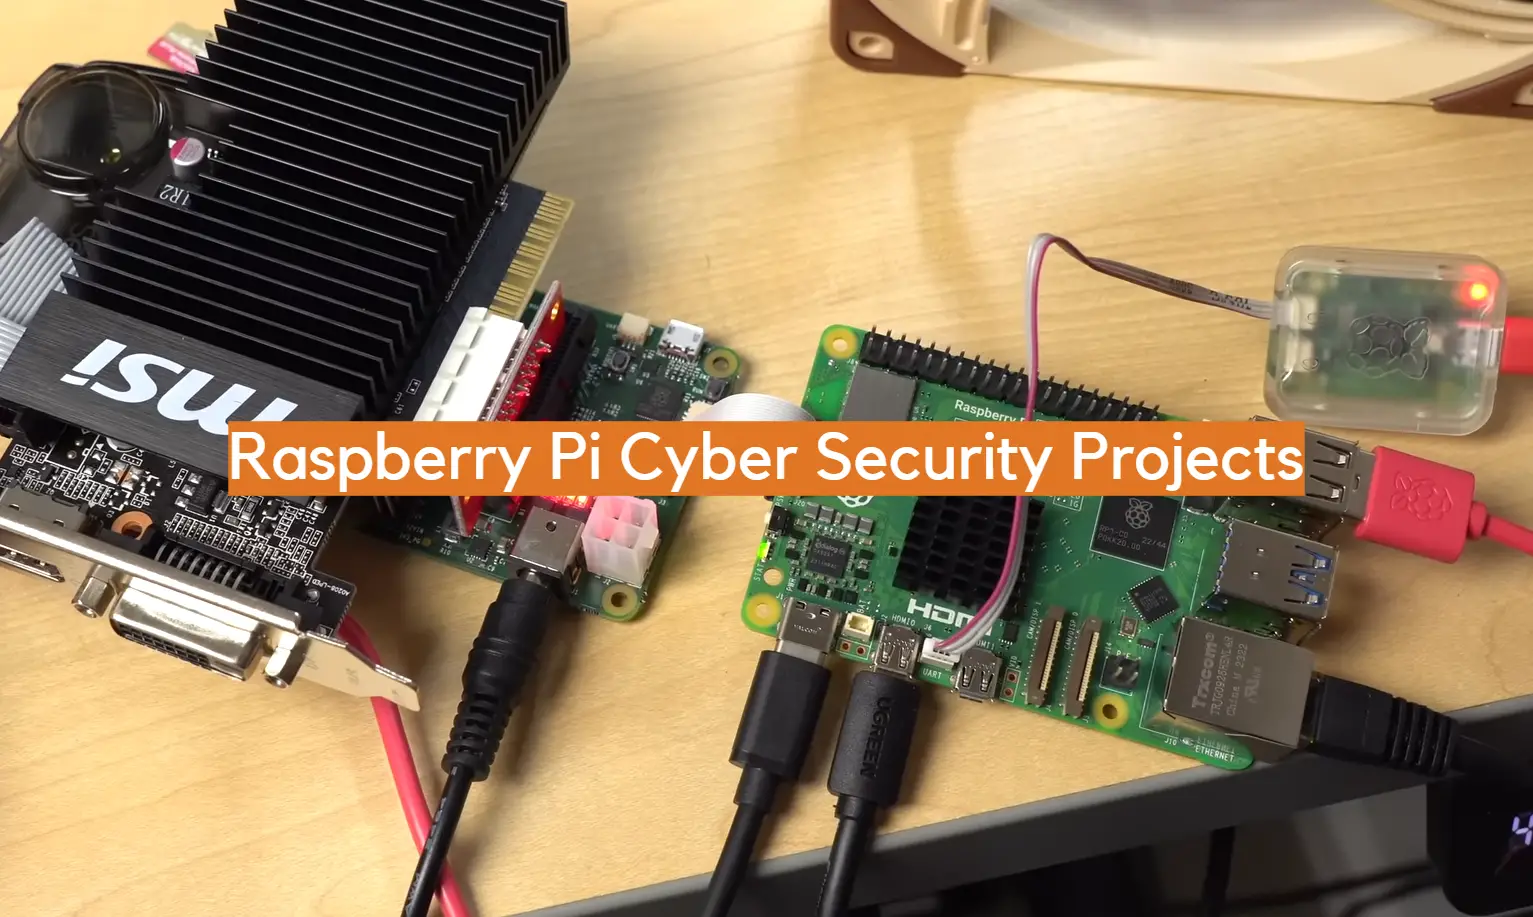 Raspberry Pi Cyber Security Projects